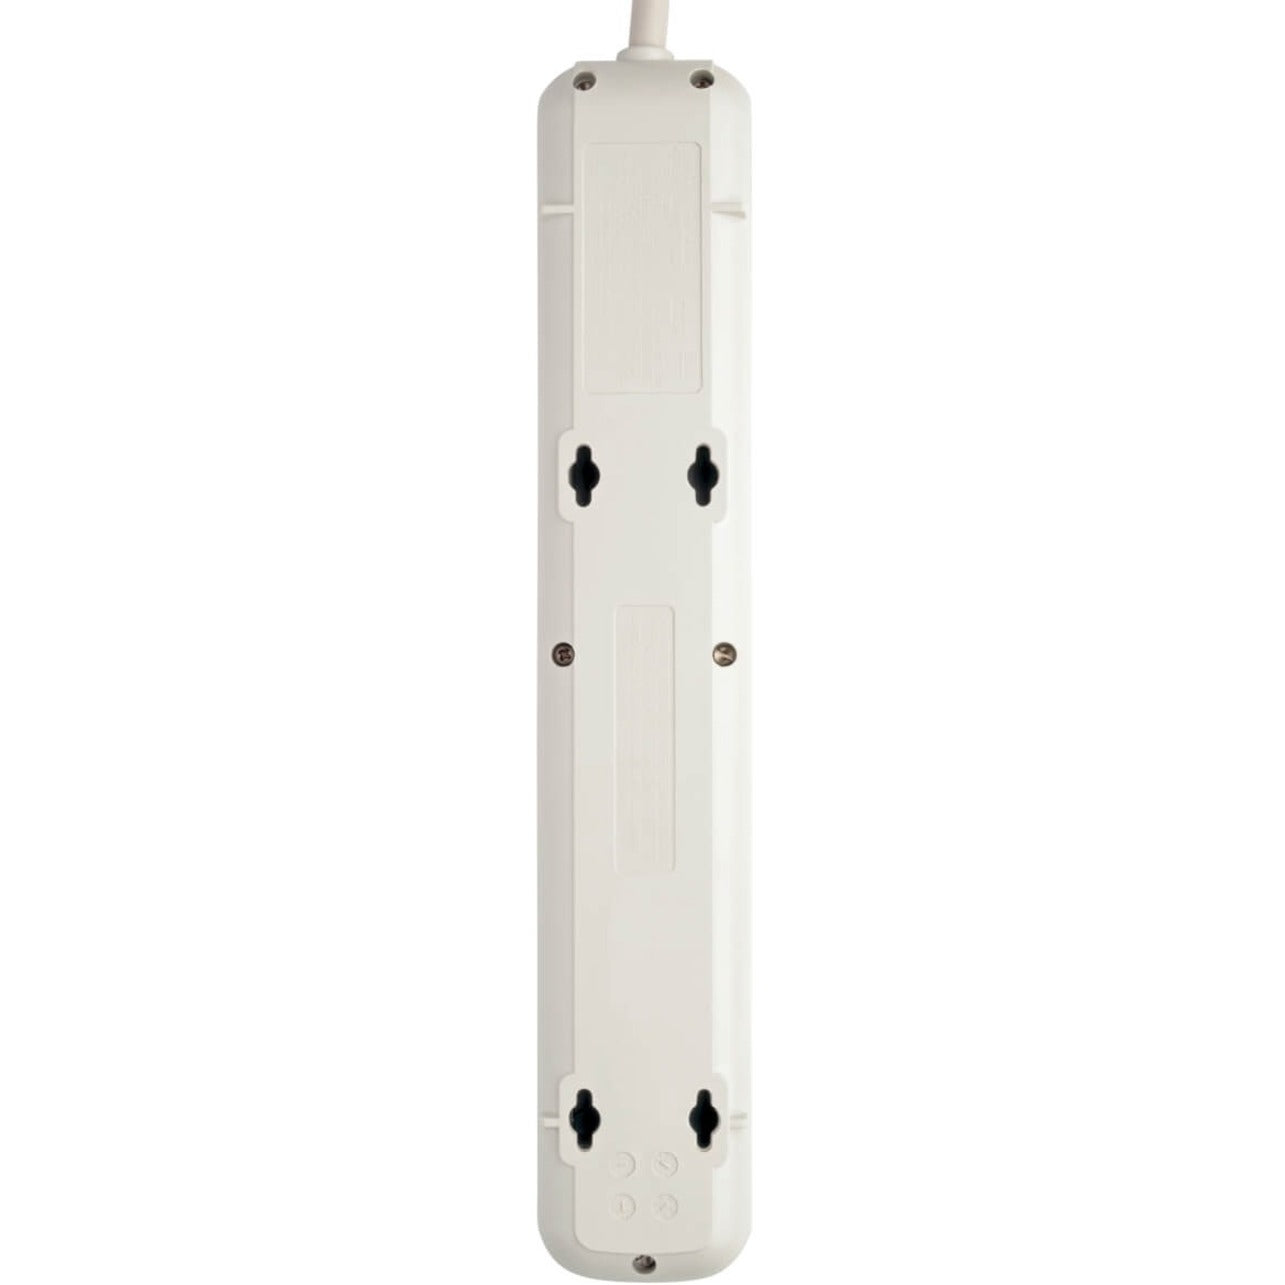 Tripp Lite TLP712 Protect It! 7-Outlet Surge Protector, 1080 Joules, 12' Cord, White